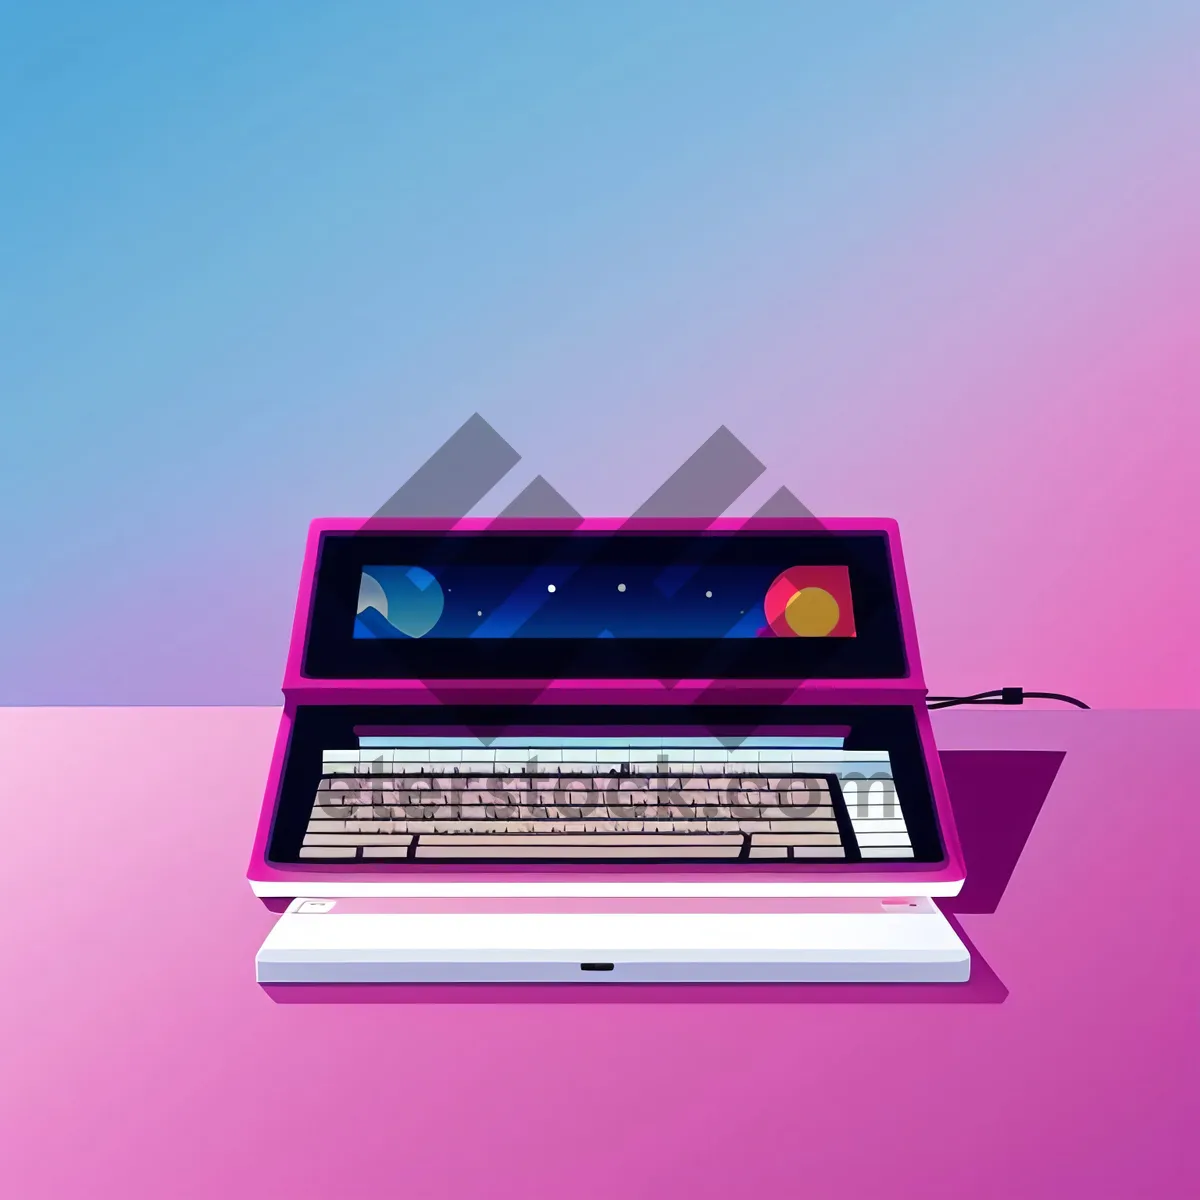 Picture of Modern Laptop with Silver Design and Blank Screen